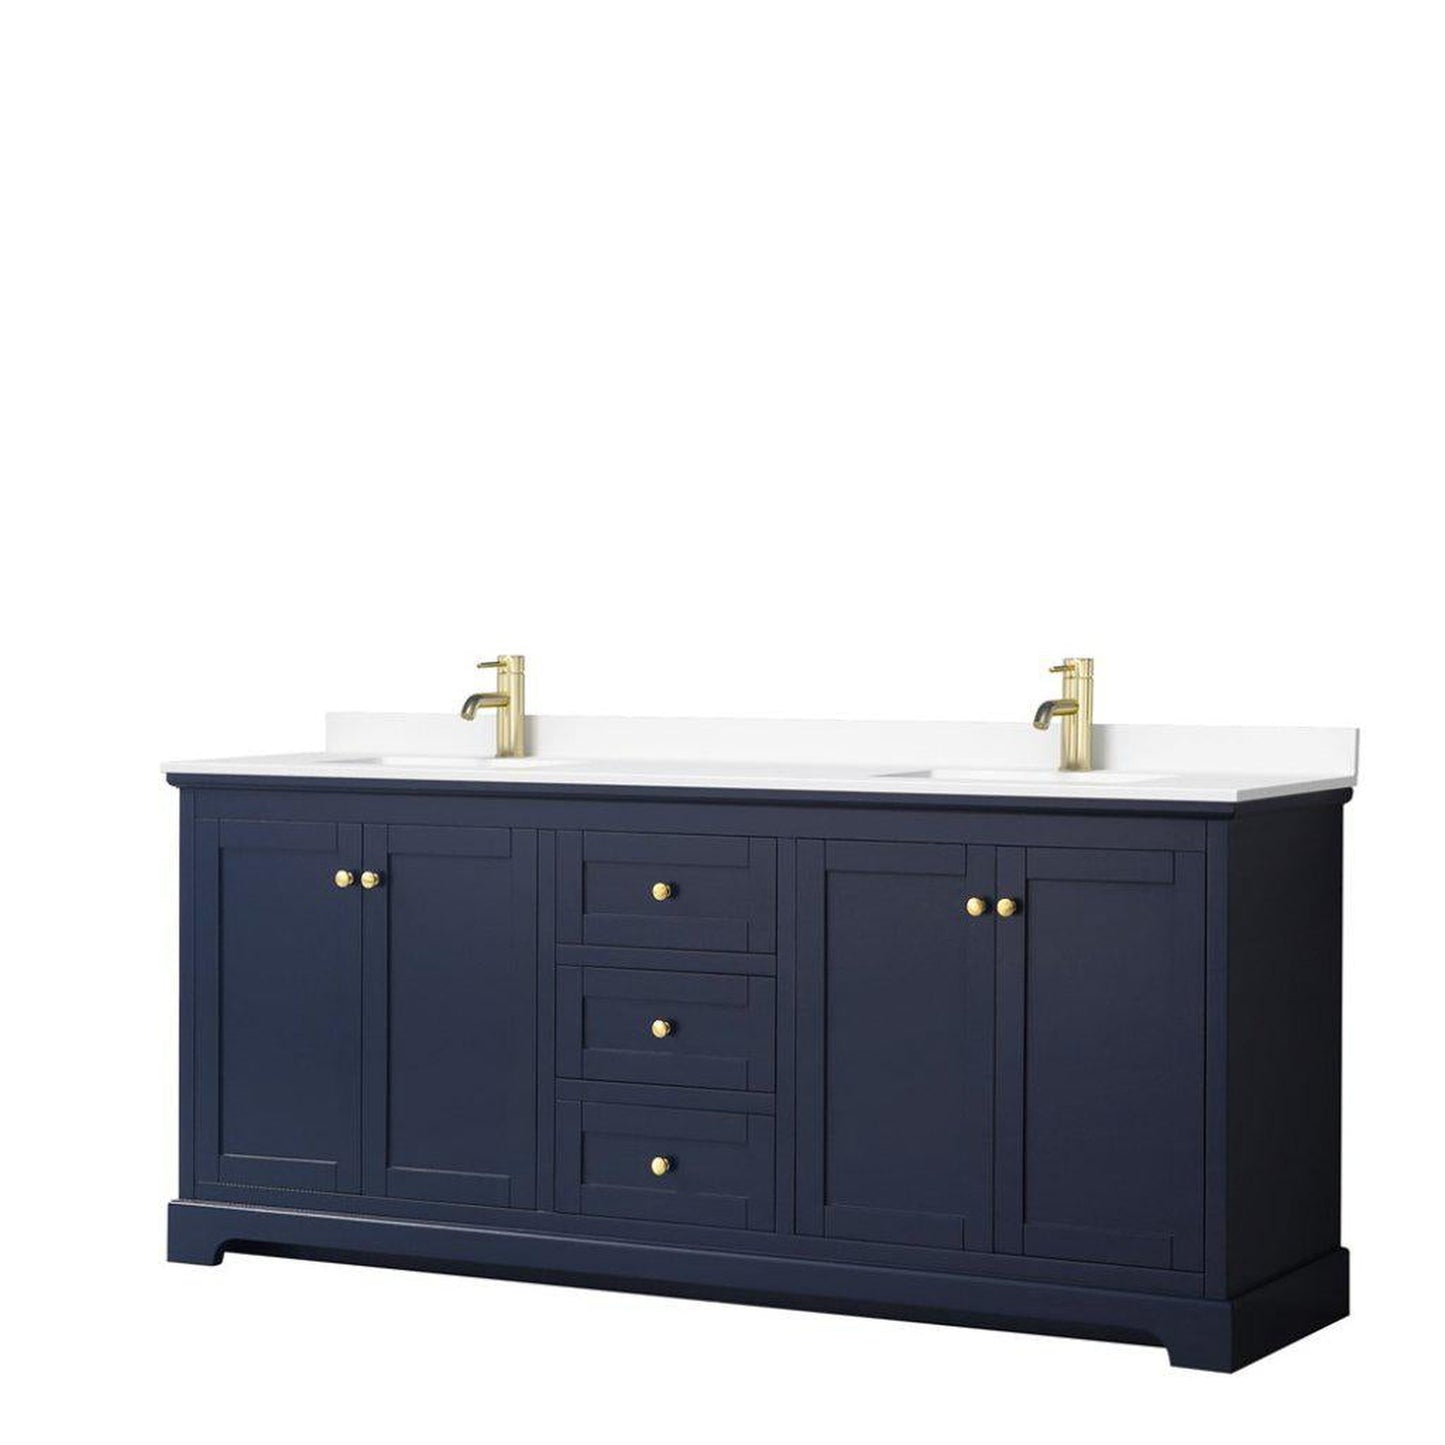 Wyndham Collection Avery 80" Dark Blue Double Bathroom Vanity With White Cultured Marble Countertop With 1-Hole Faucet And Square Sink